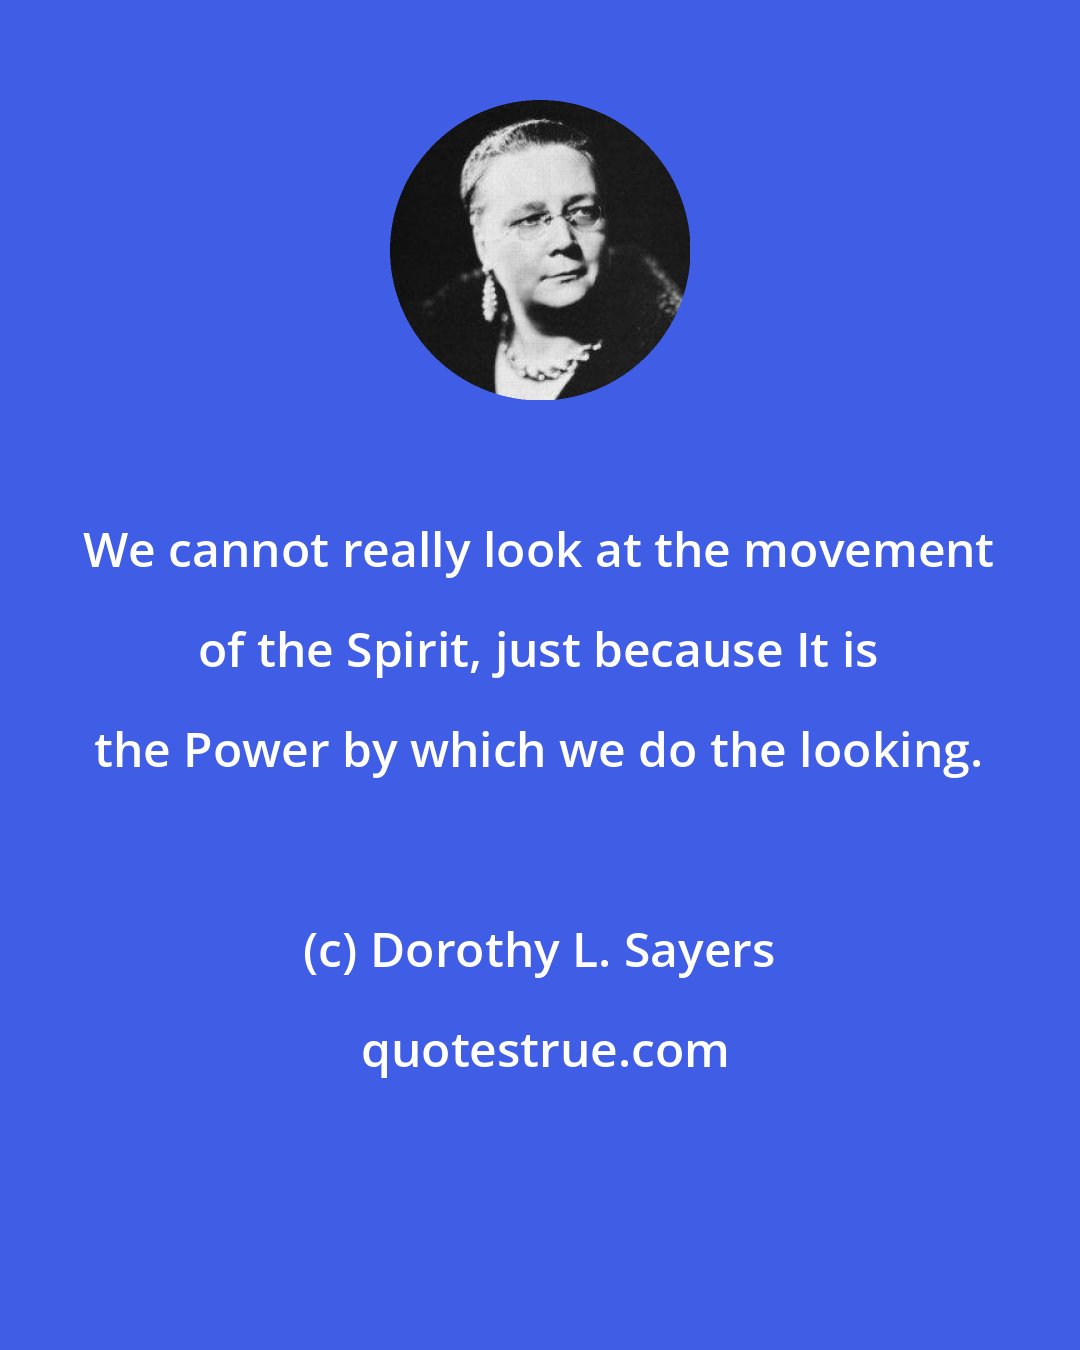 Dorothy L. Sayers: We cannot really look at the movement of the Spirit, just because It is the Power by which we do the looking.